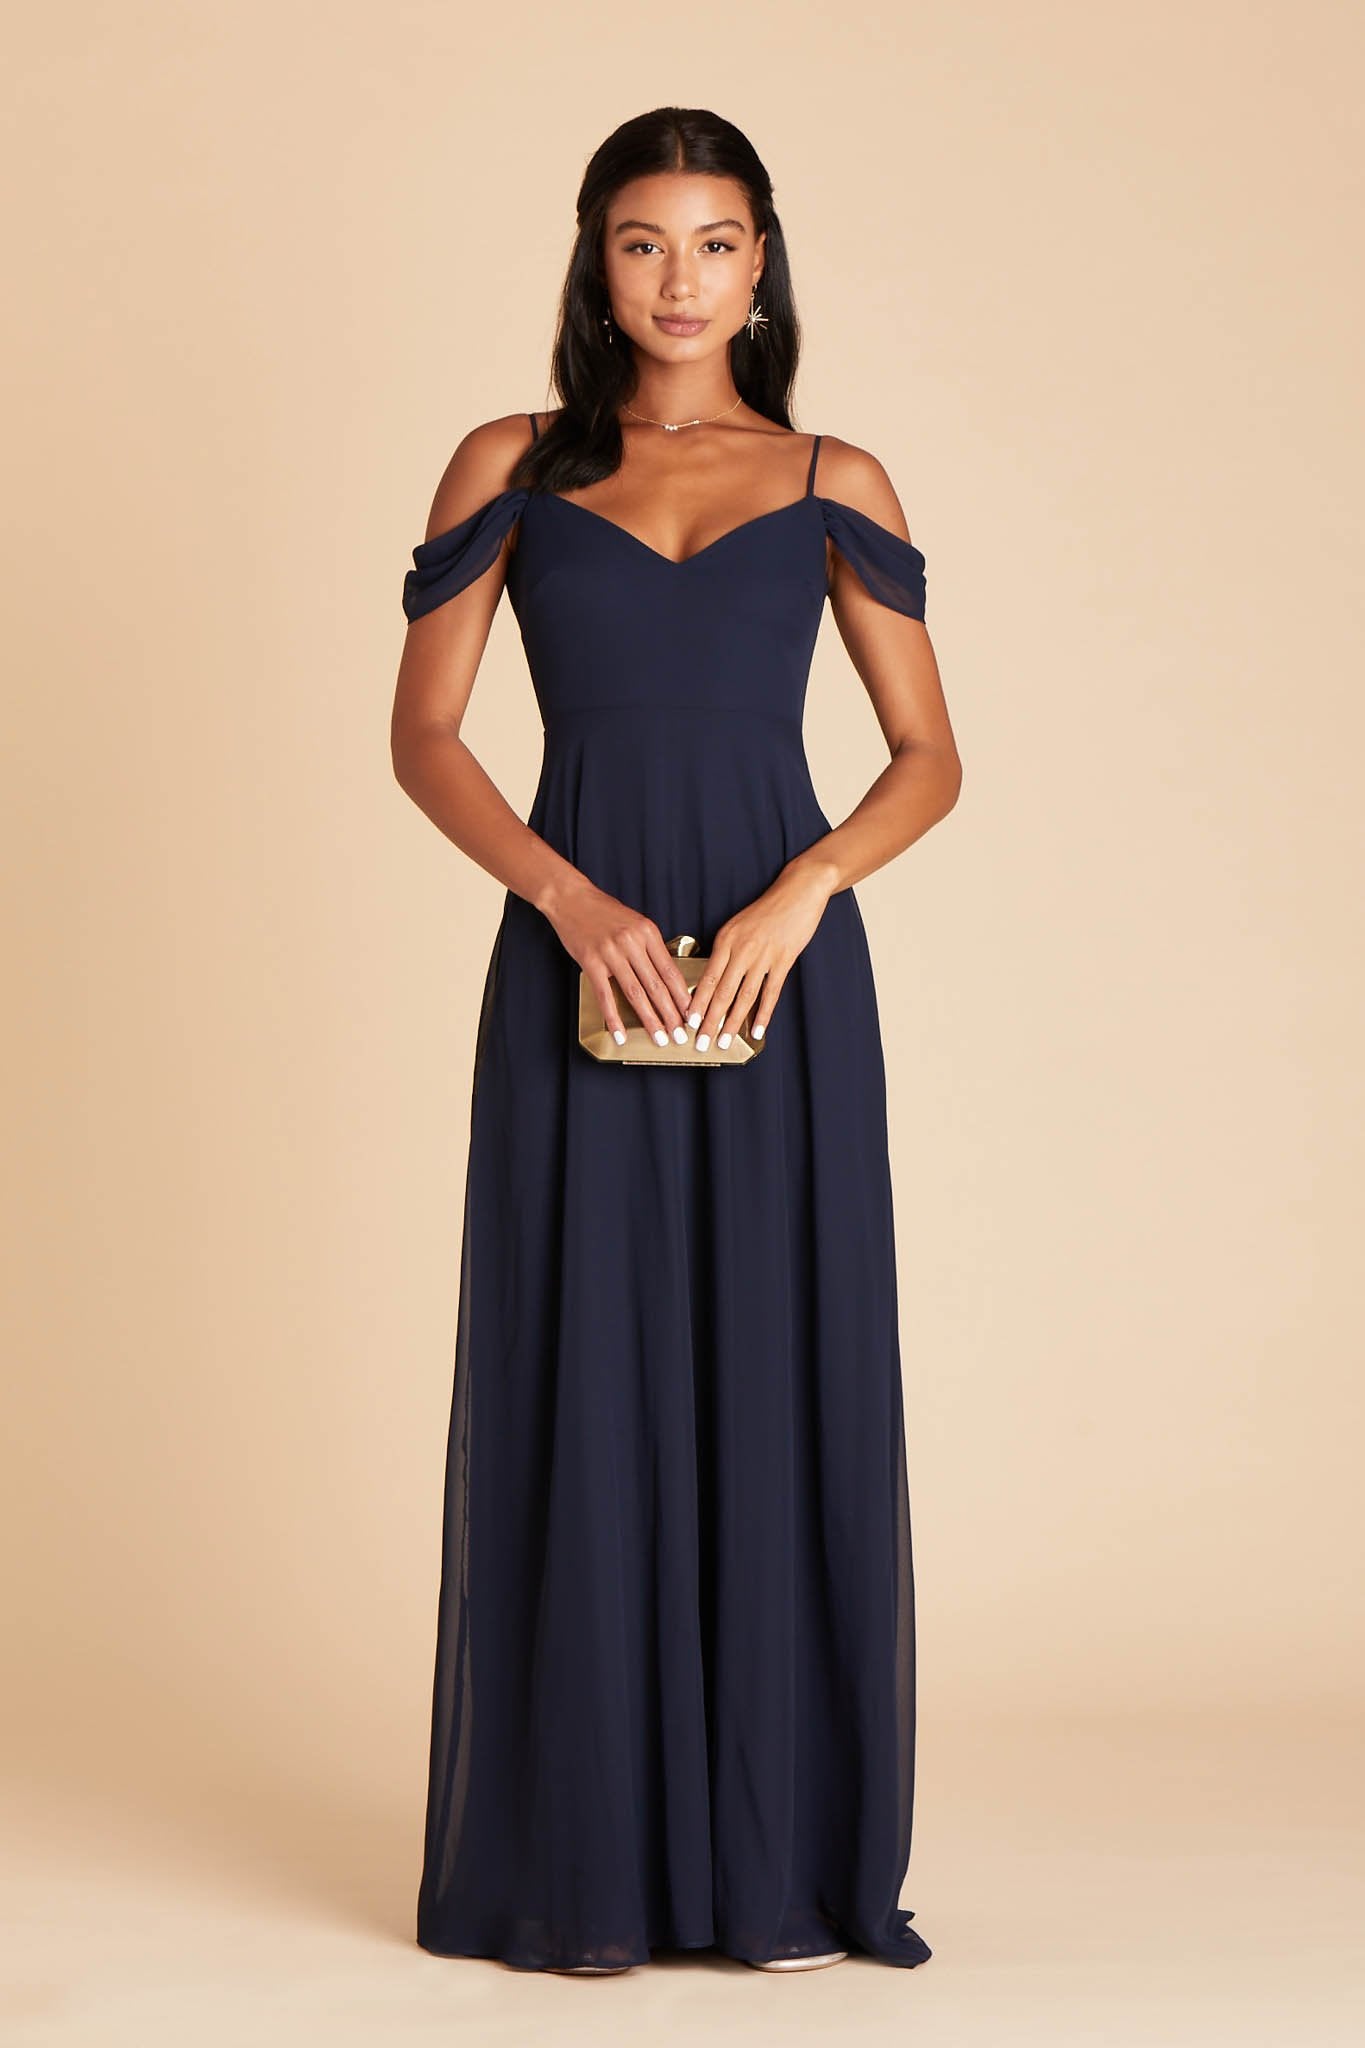 Devin convertible bridesmaid dress in navy blue chiffon by Birdy Grey, front view